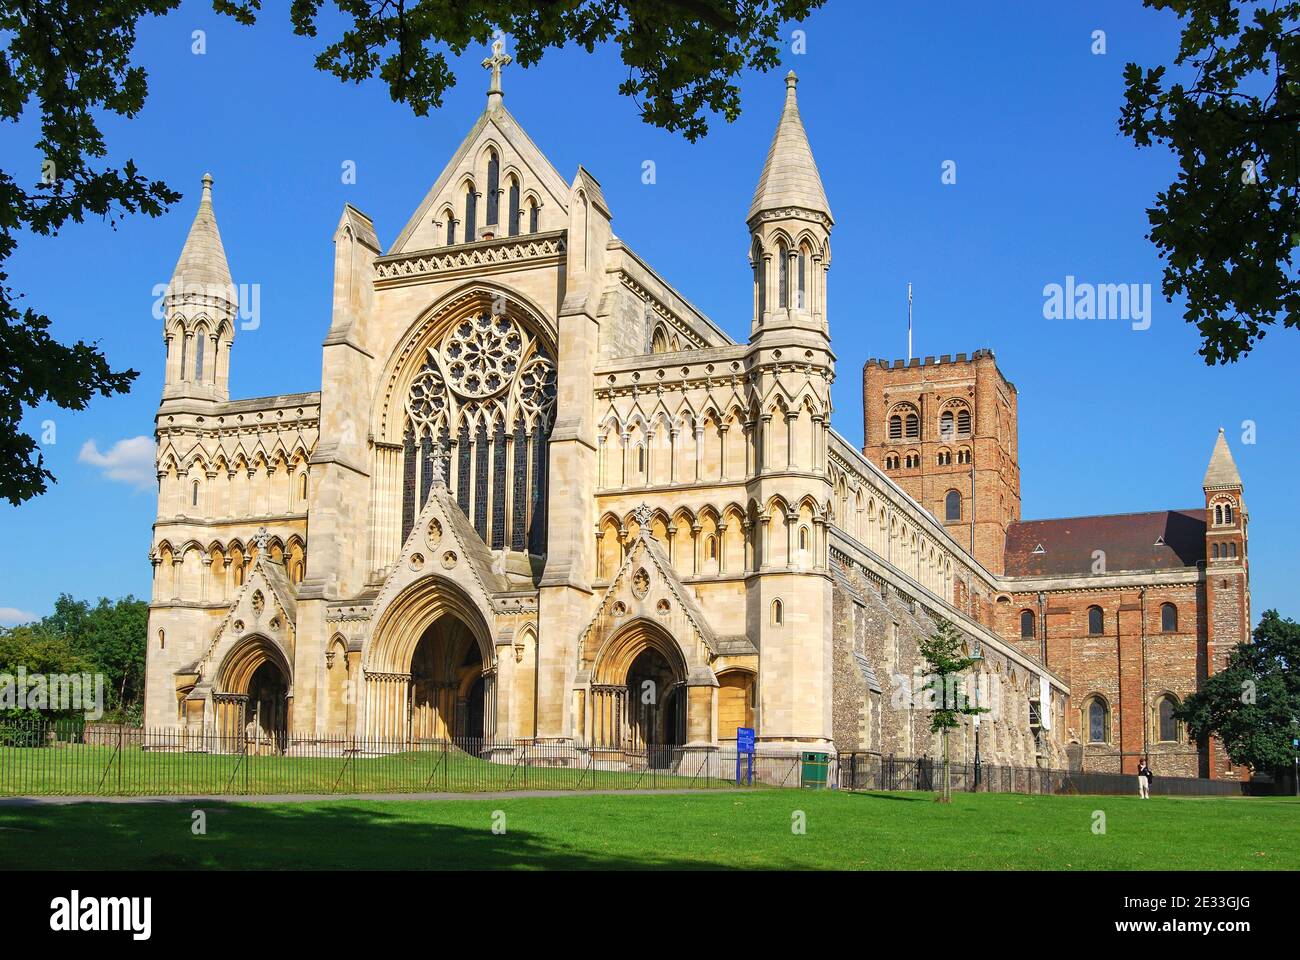 Il West End, Cattedrale normanna & Abbey Church tower, St.Albans, Hertfordshire, England, Regno Unito Foto Stock